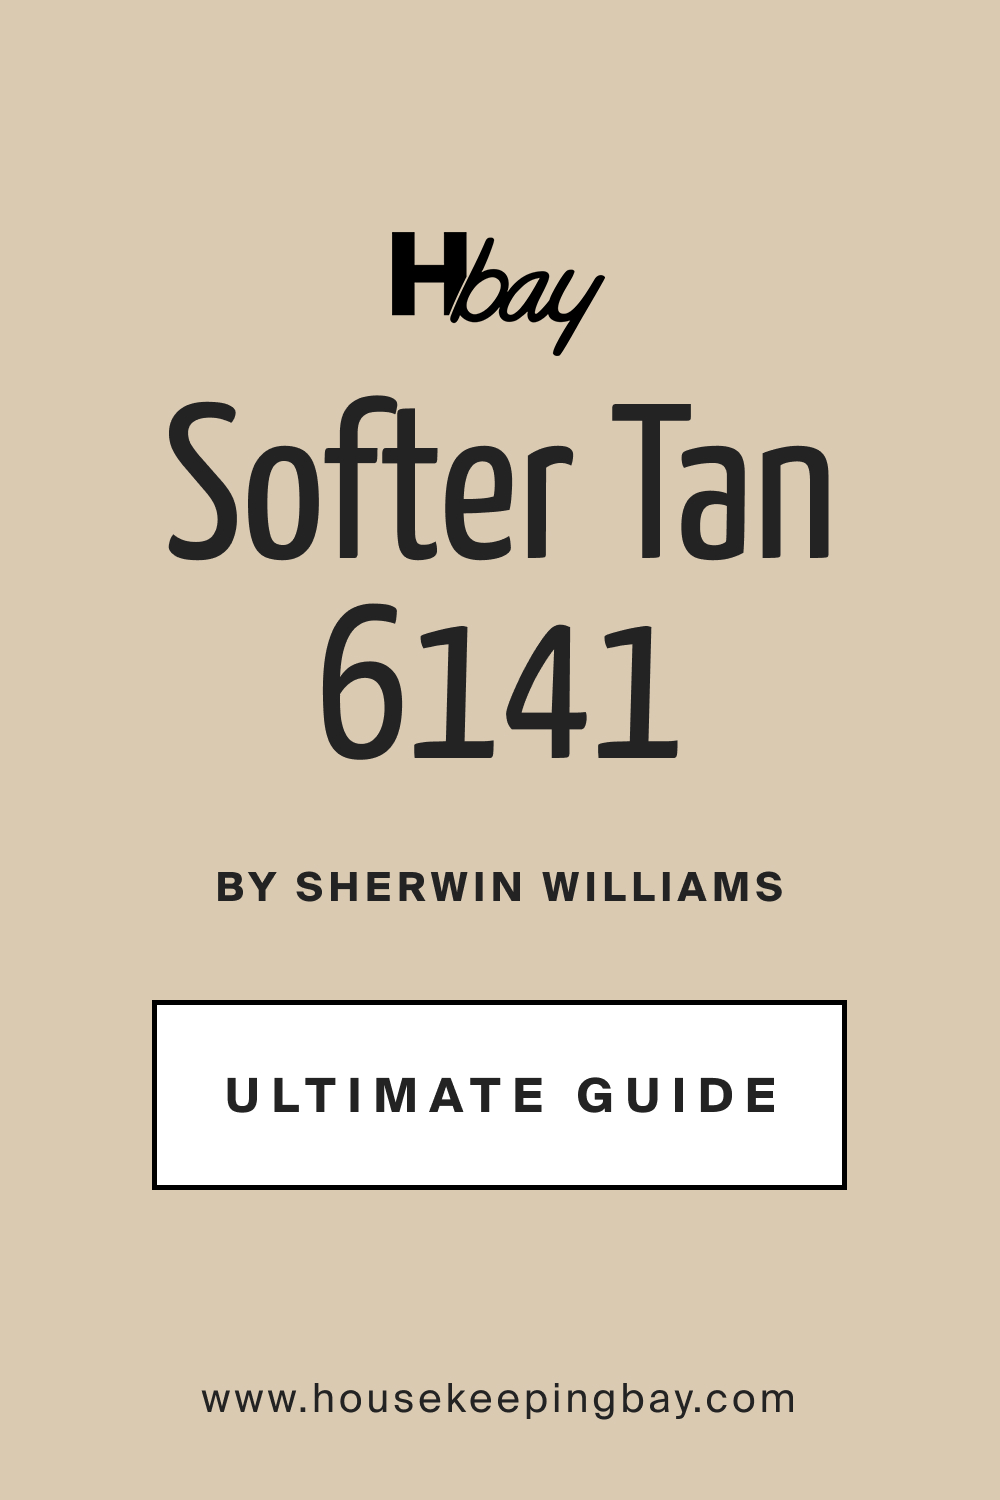 Softer Tan SW 6141 by Sherwin Williams Ultimate Guide